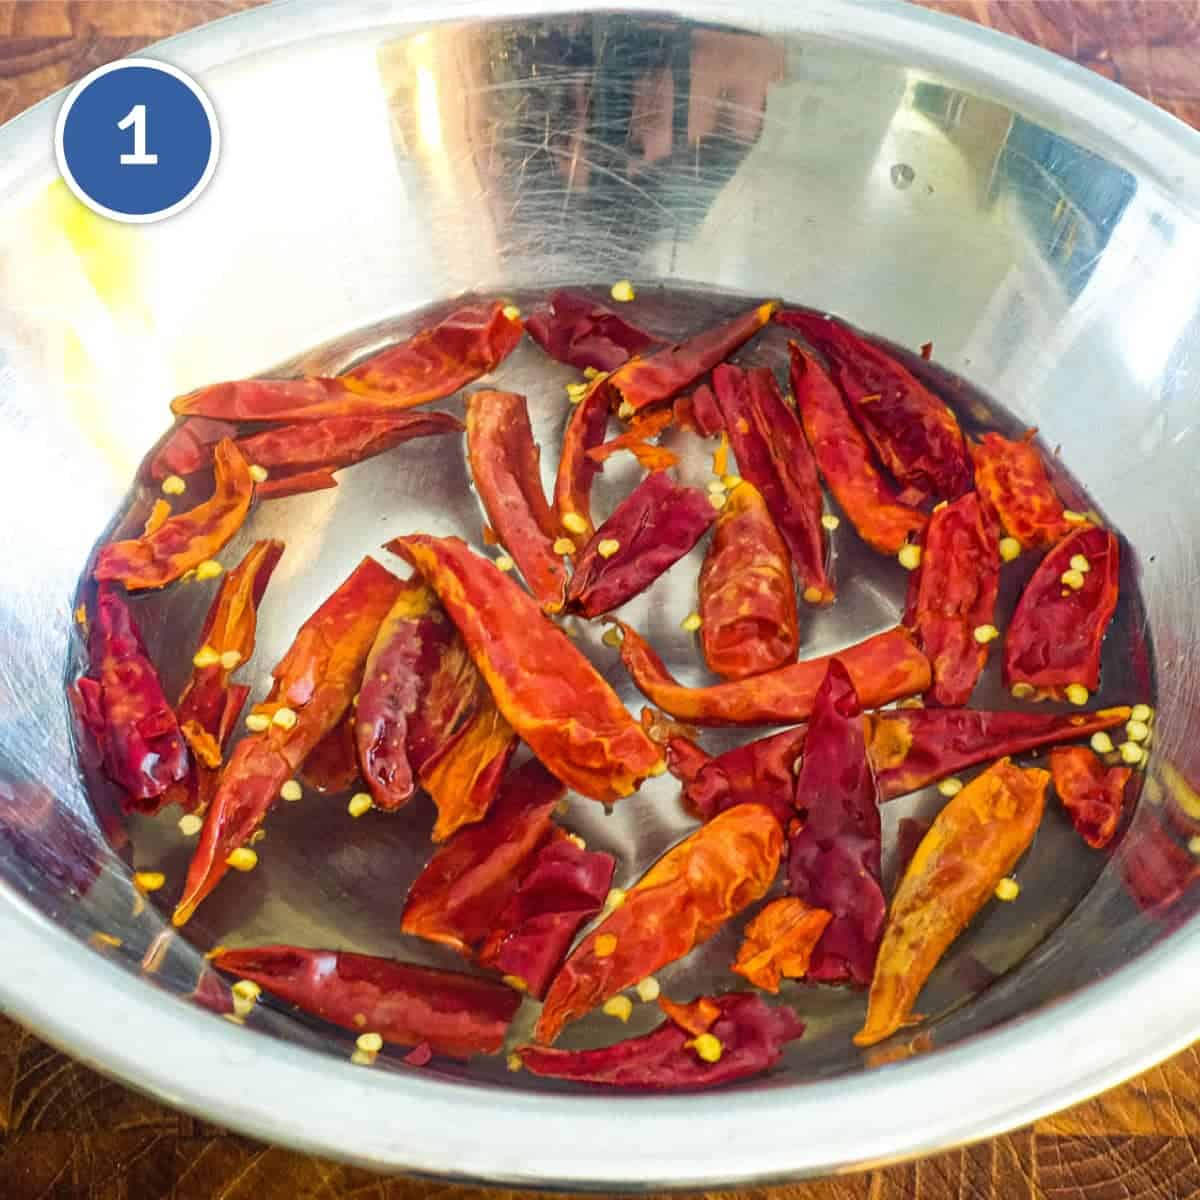 Dried chillies soaking in water for a Malaysian Sambal Sauce